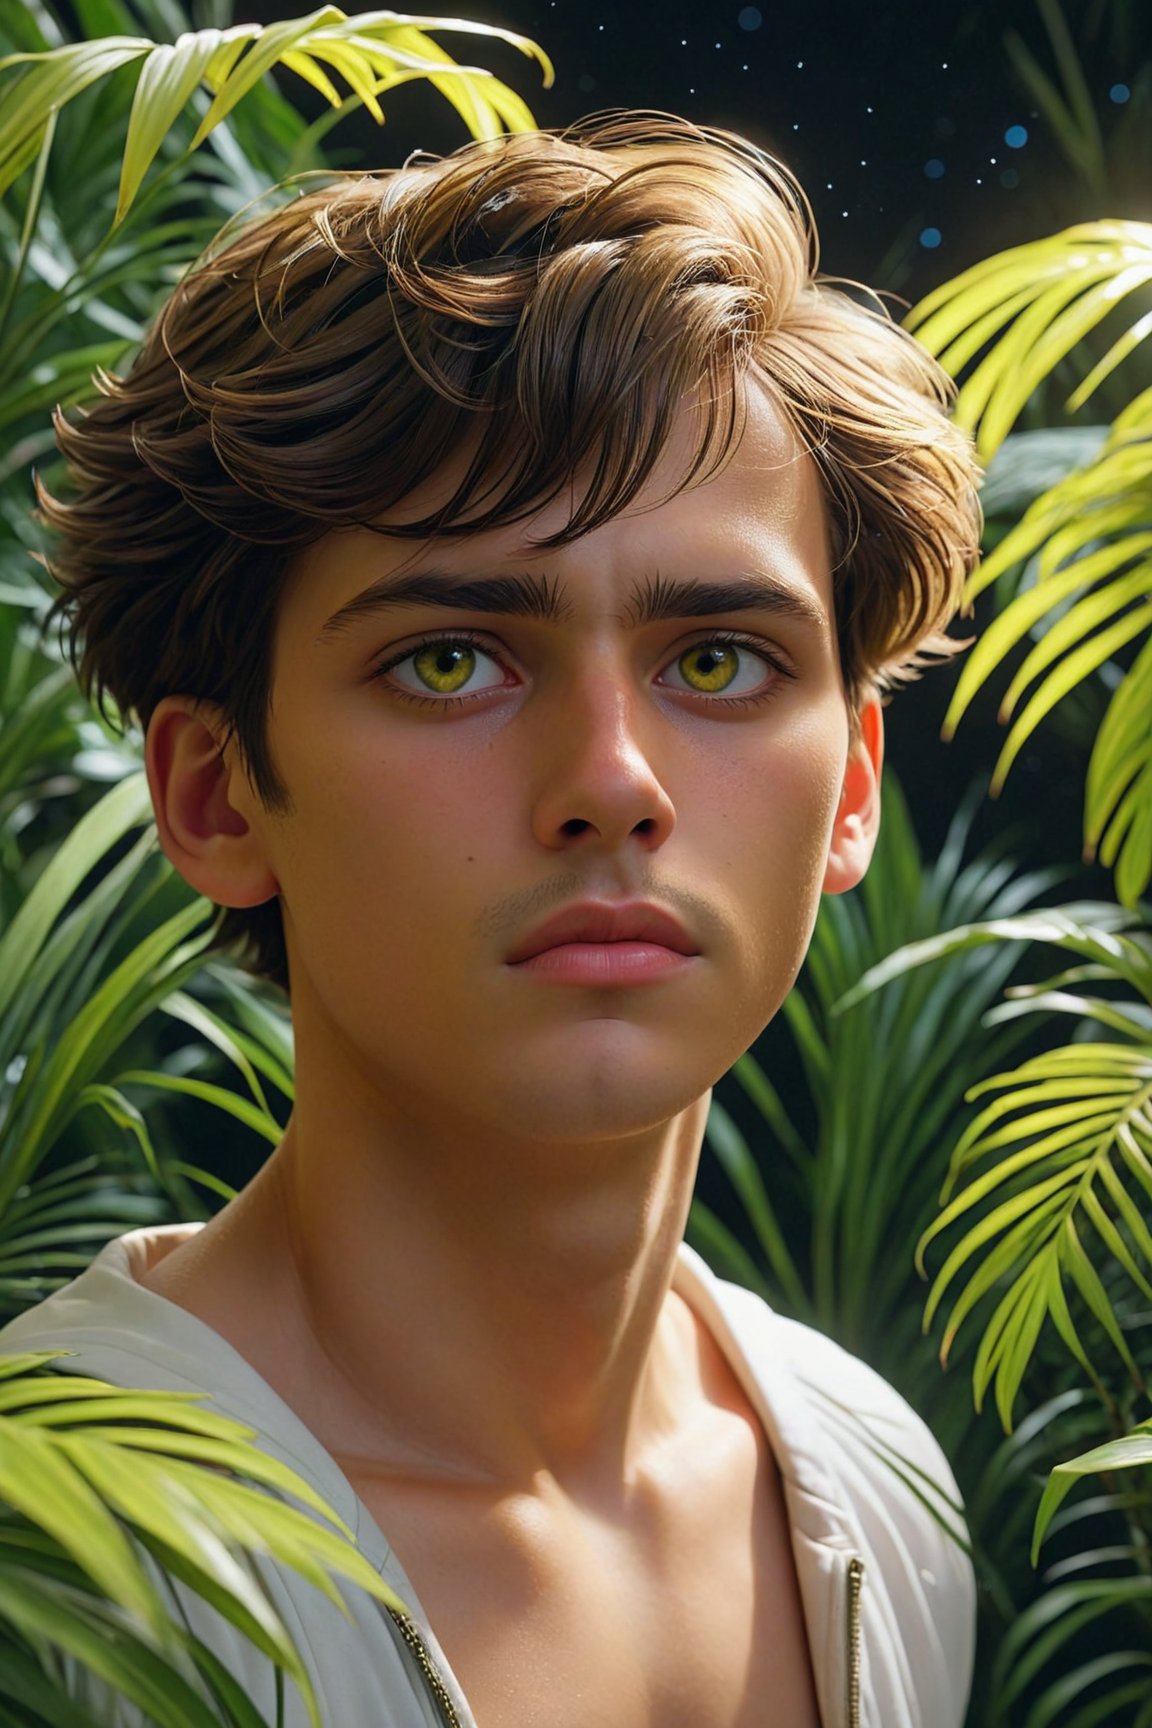 (best quality, 8K, ultra-detailed, masterpiece), 3D, A mesmerizing 8K portrait capturing the essence of a solitary boy in a close-up view, his gaze fixed afar, set against the backdrop of a synthwave art style poster. The scene is adorned with lush palm leaves and delicate white flowers, adding an intriguing geometric pattern to the composition. The entire setting is bathed in a neon yellow glow, reminiscent of the synthwave aesthetic, against a dark, starry night sky illuminated by bioluminescent elements. This artwork radiates fortitude and wholesome beauty, inviting you to immerse yourself in its unique and captivating world.